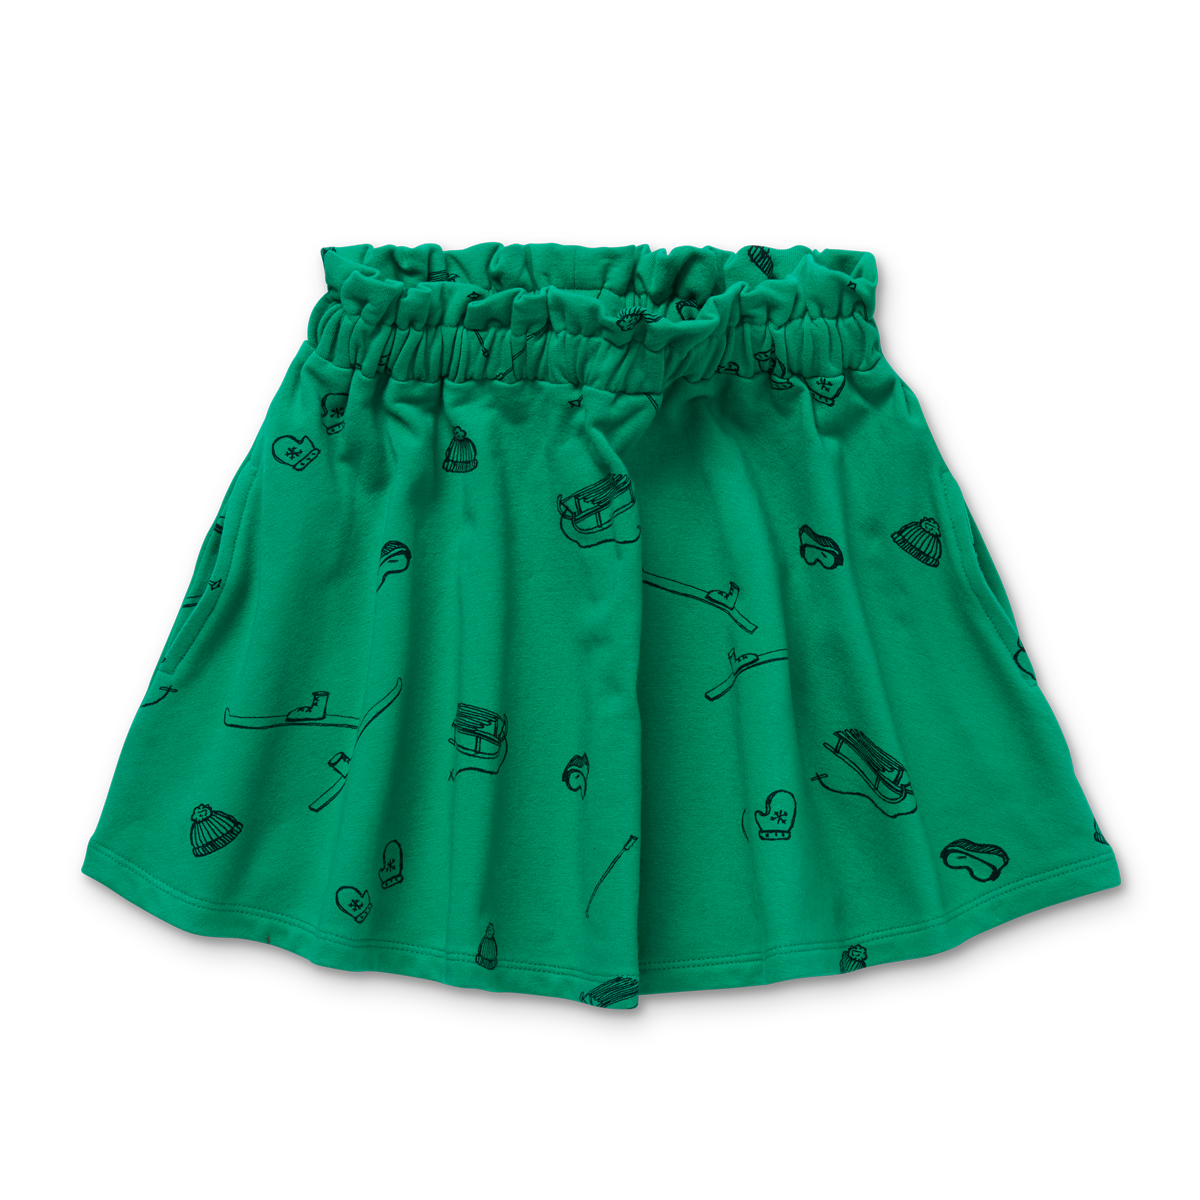 Sproet and Sprout Teal Ski Print Skirt